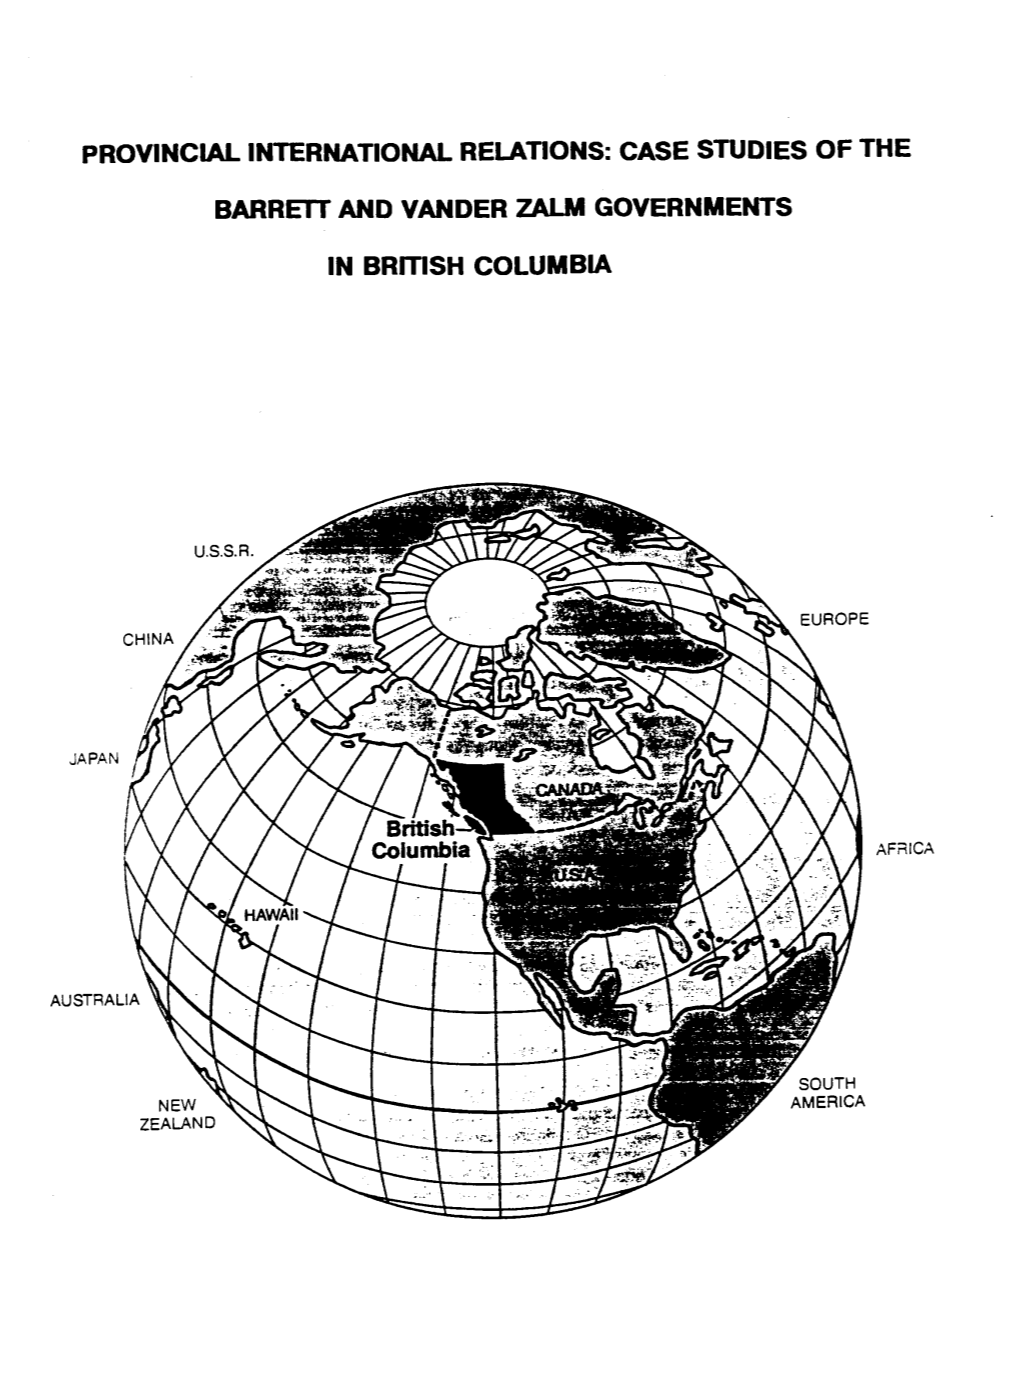 Case Studies of the Barrett and Vander Zalm Administrations in British Columbia